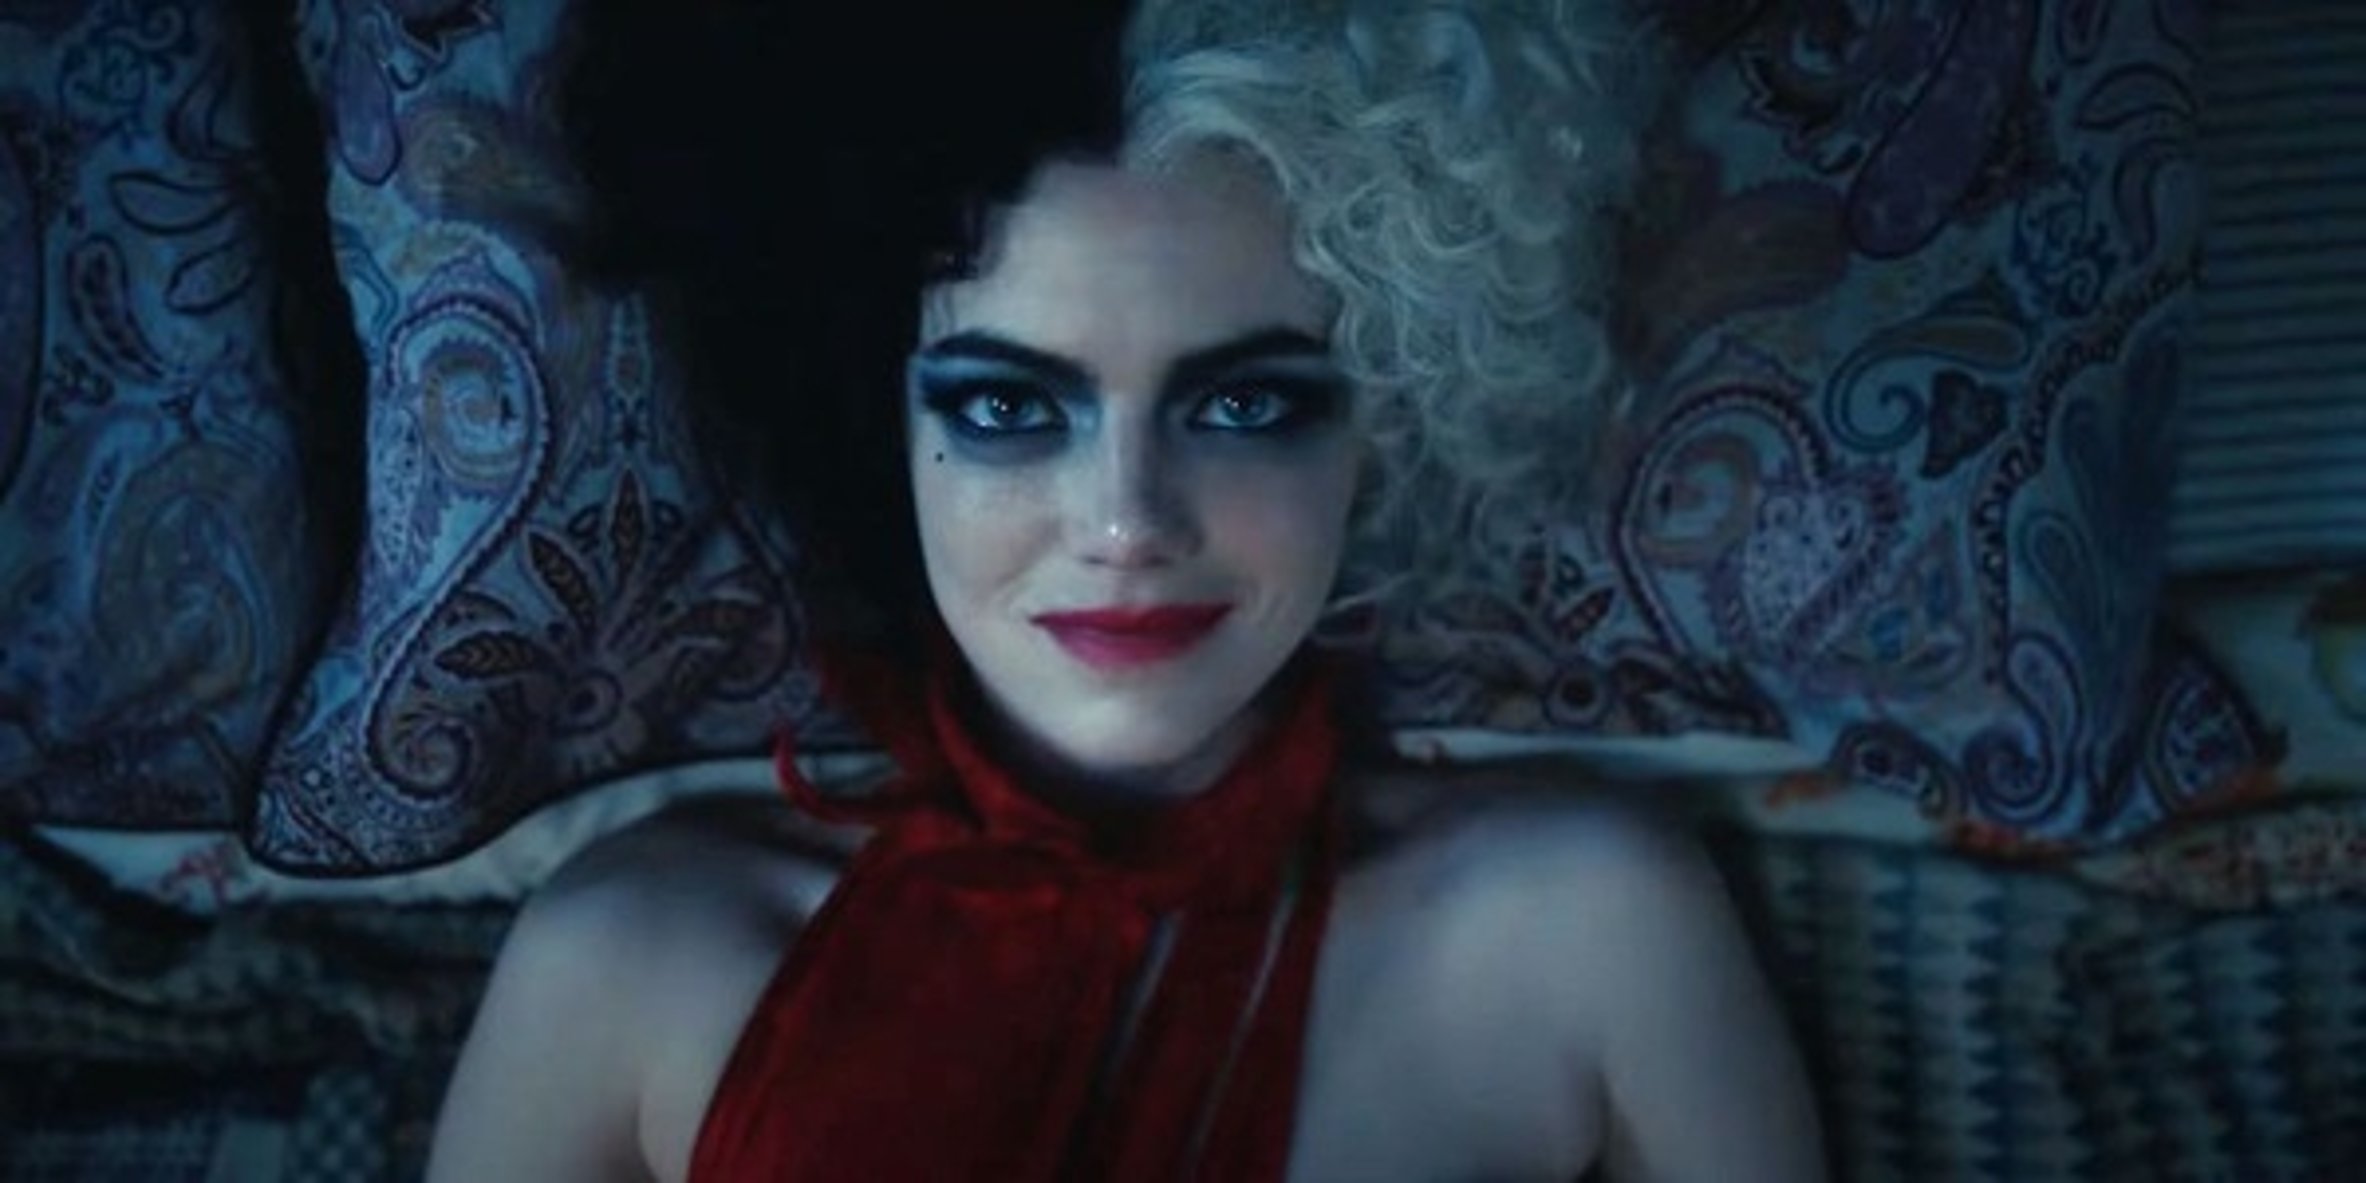 Cruella Director Explains How He Felt About The Movie Being Compared To Joaquin Phoenix’s Joker